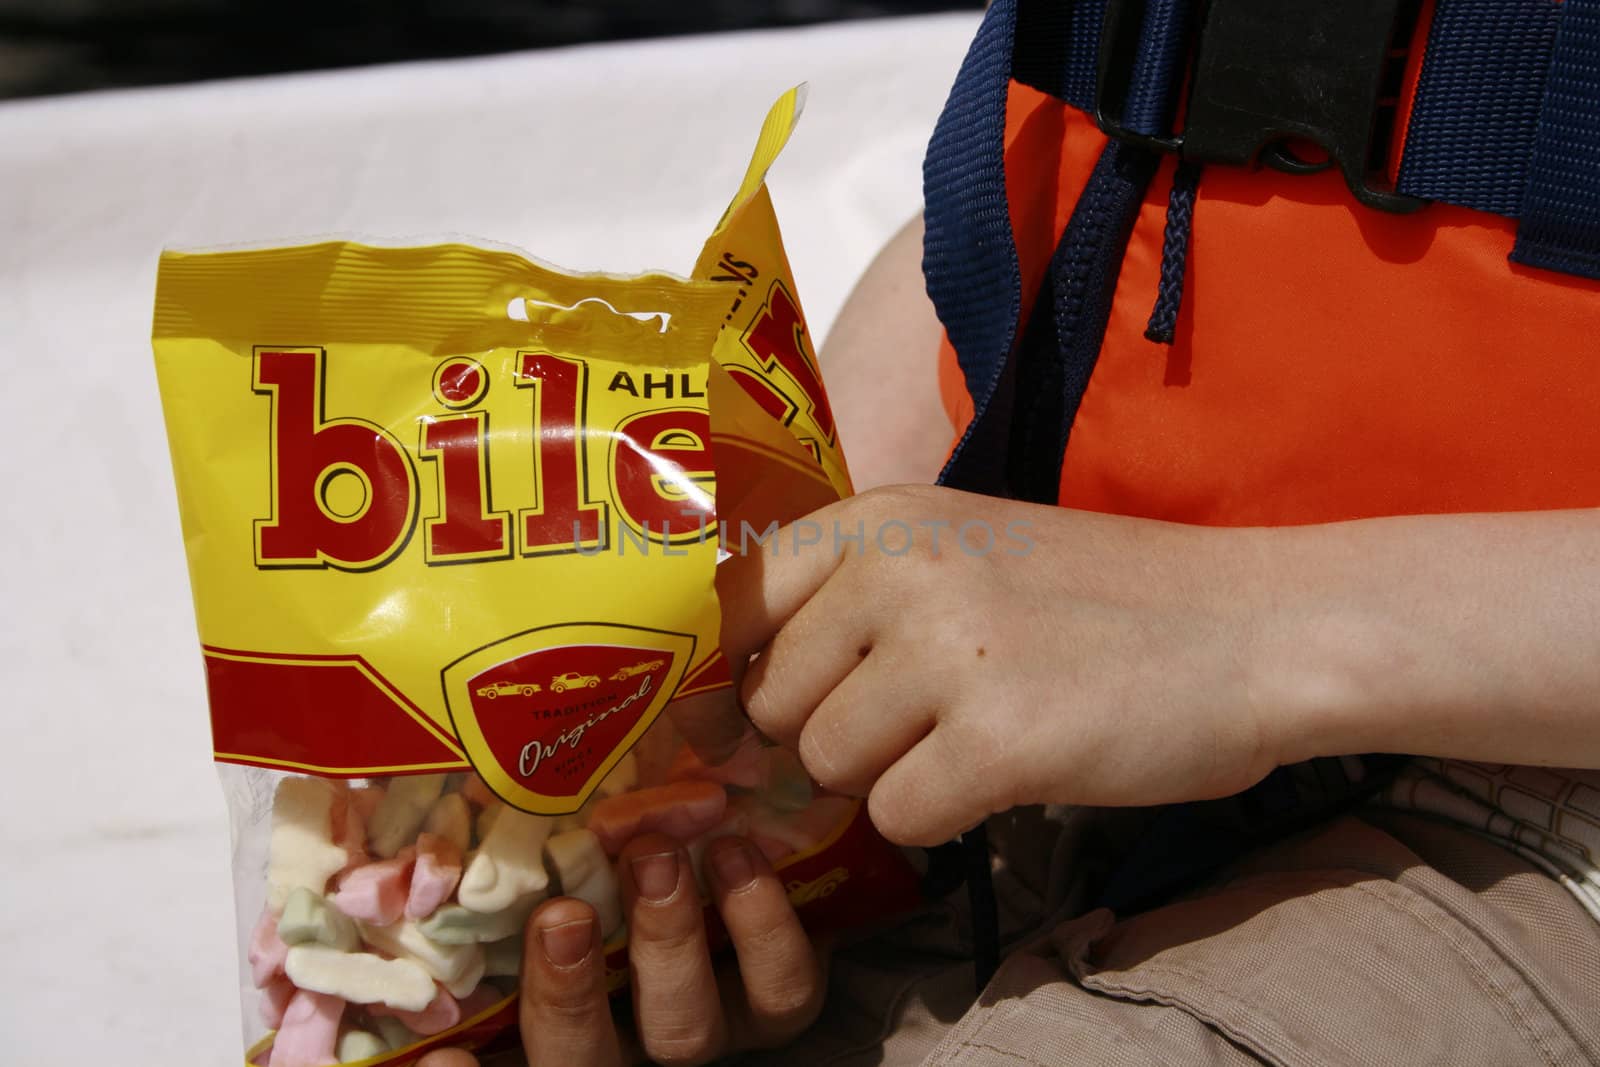 swedish candy called biler (cars). very popular with the kids. here depicted in the hand of a child on a boat trip. the child is wearing a life vest.